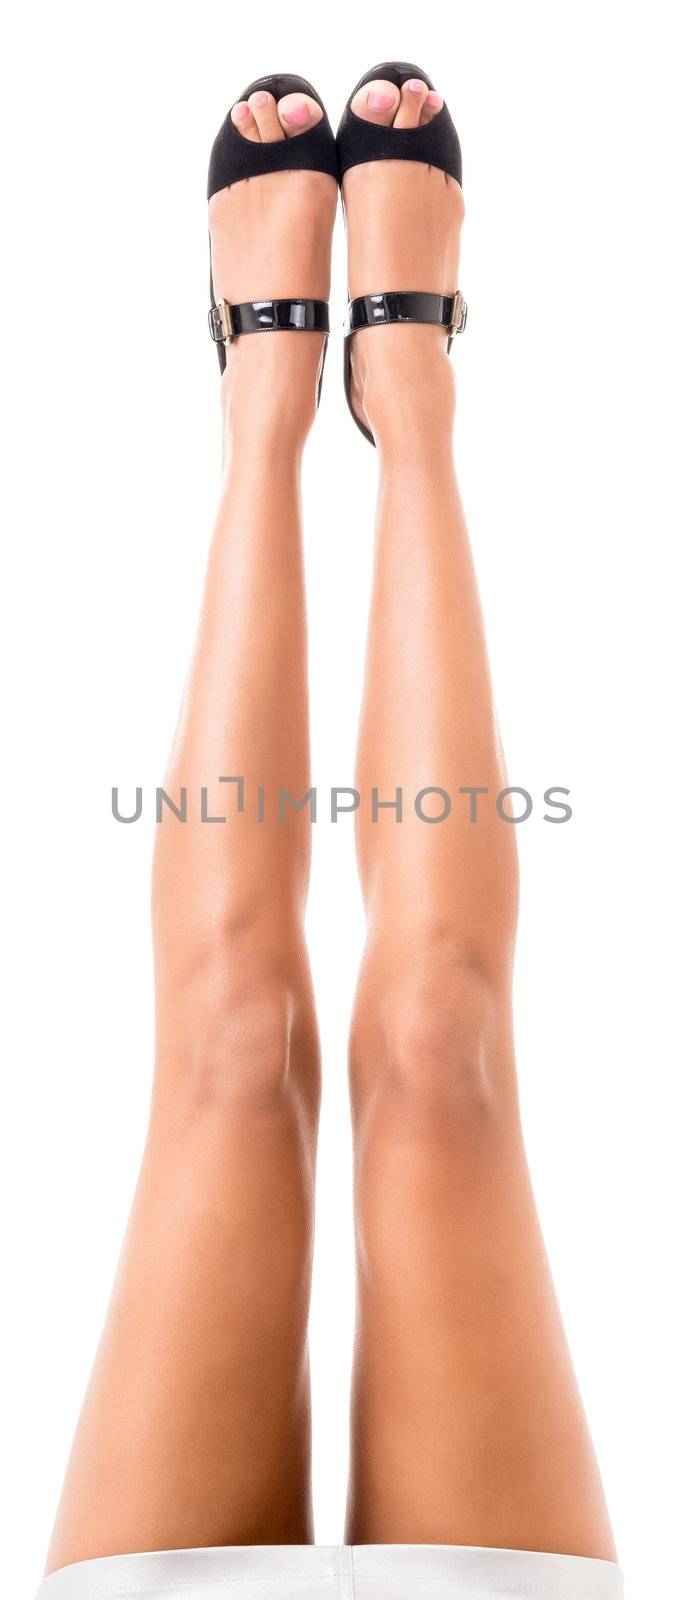 female crossed legs isolated on white background